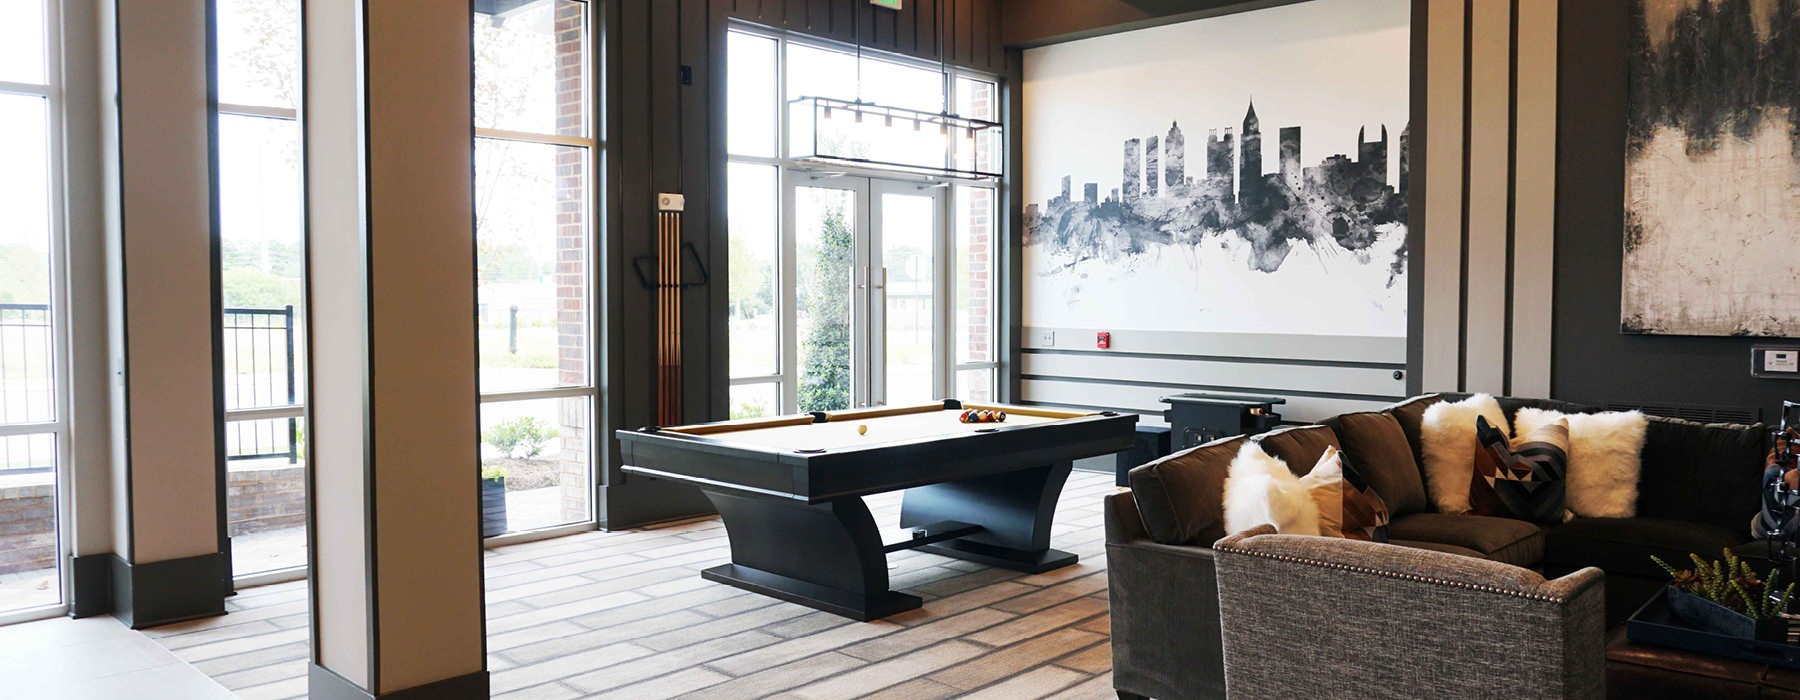 billiards table in large clubhouse with lots of natural lighting